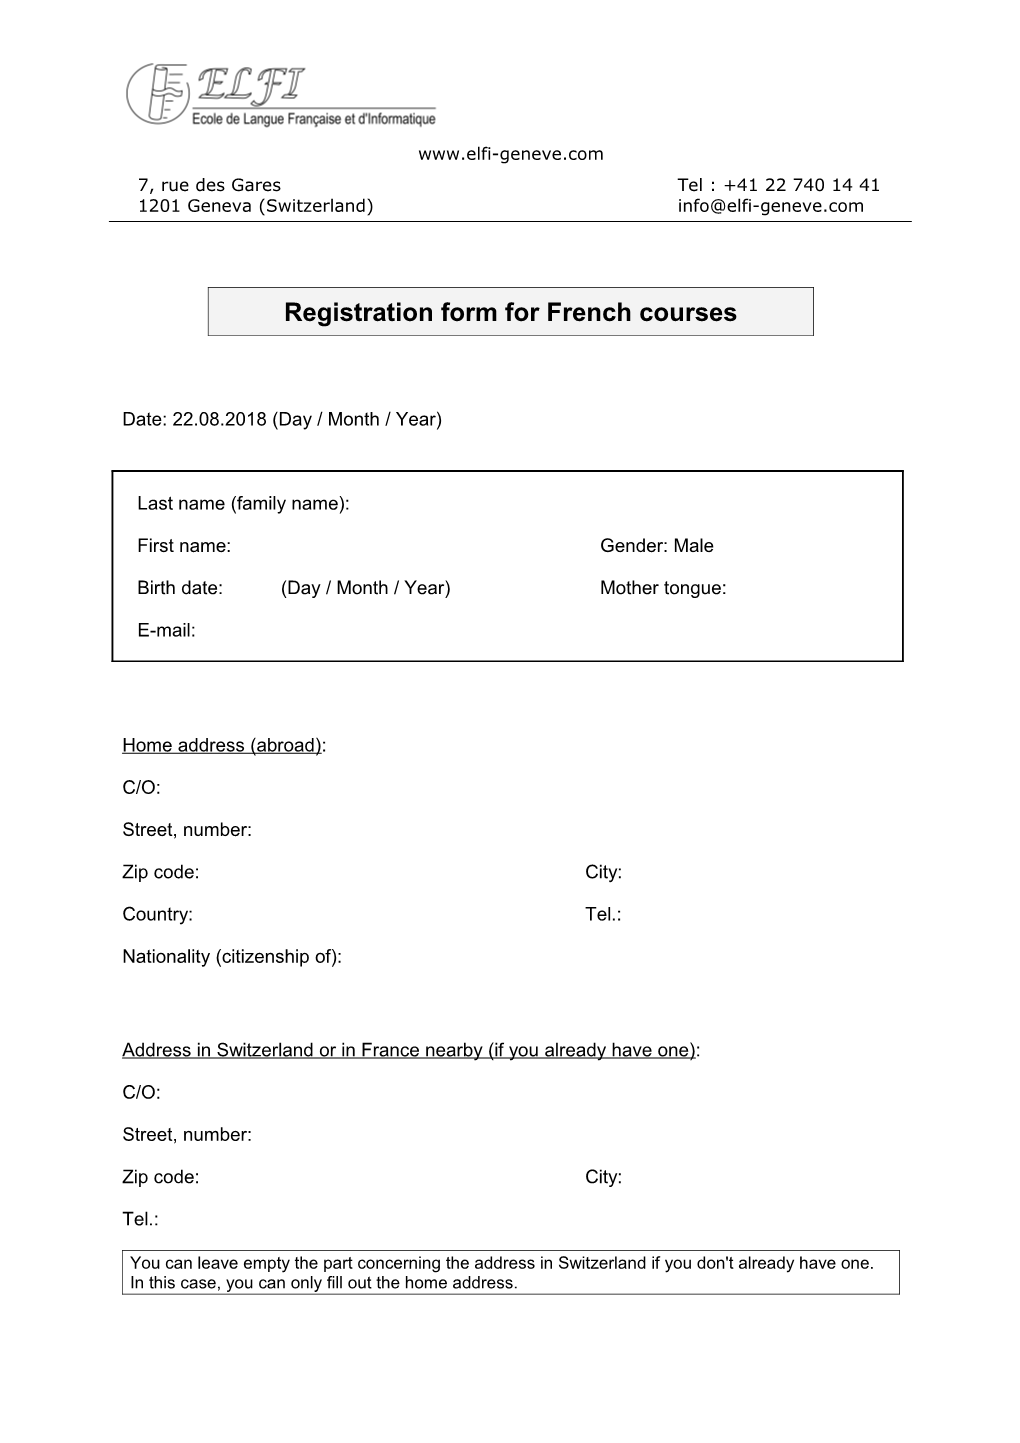 Registration Form for French Courses